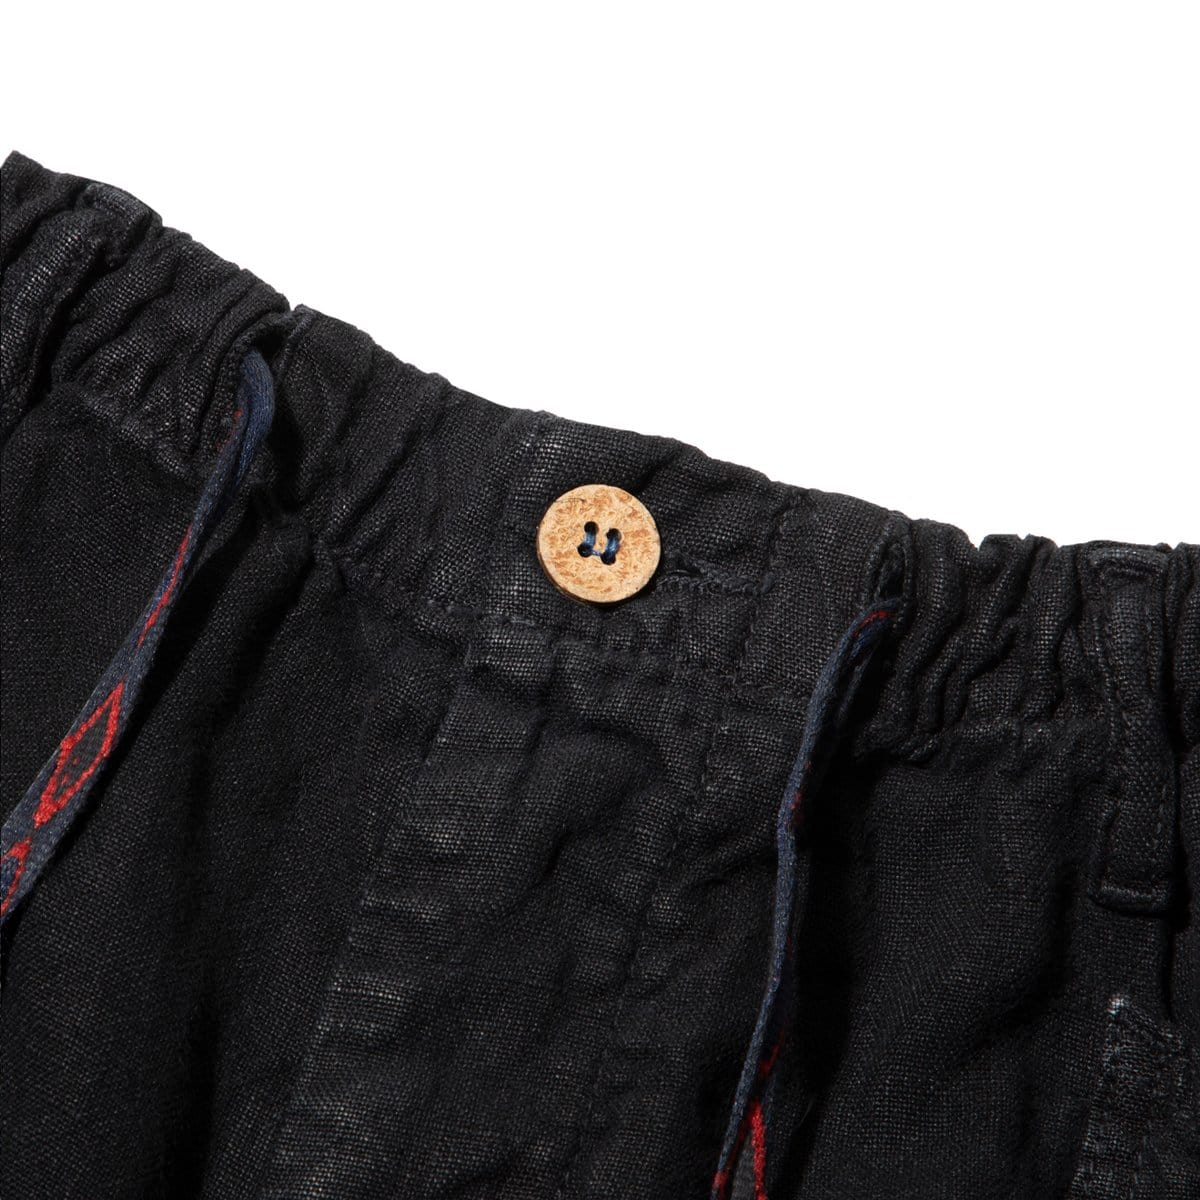 Dr. Collectors Bottoms SUNDAY SHORTS